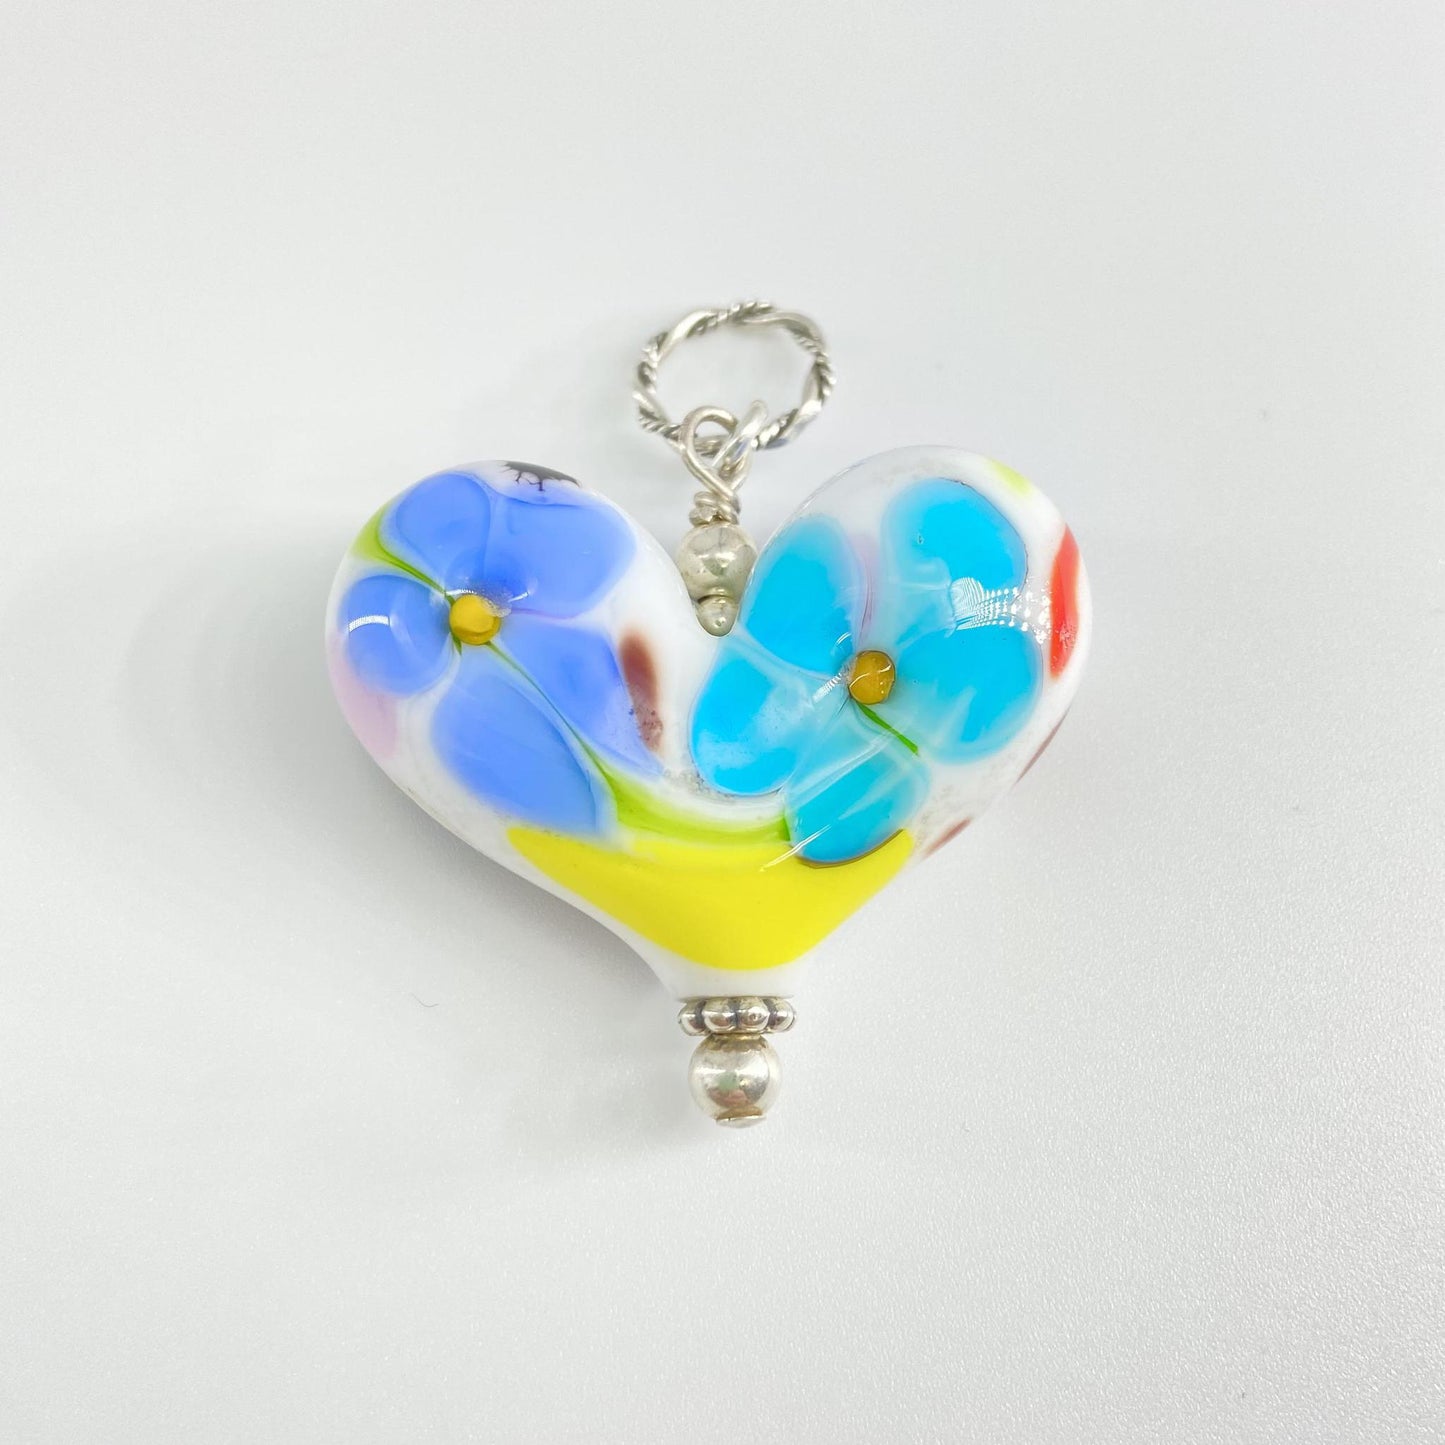 Pendant - Abstract Floral Heart - Blues on White - Handmade Glass